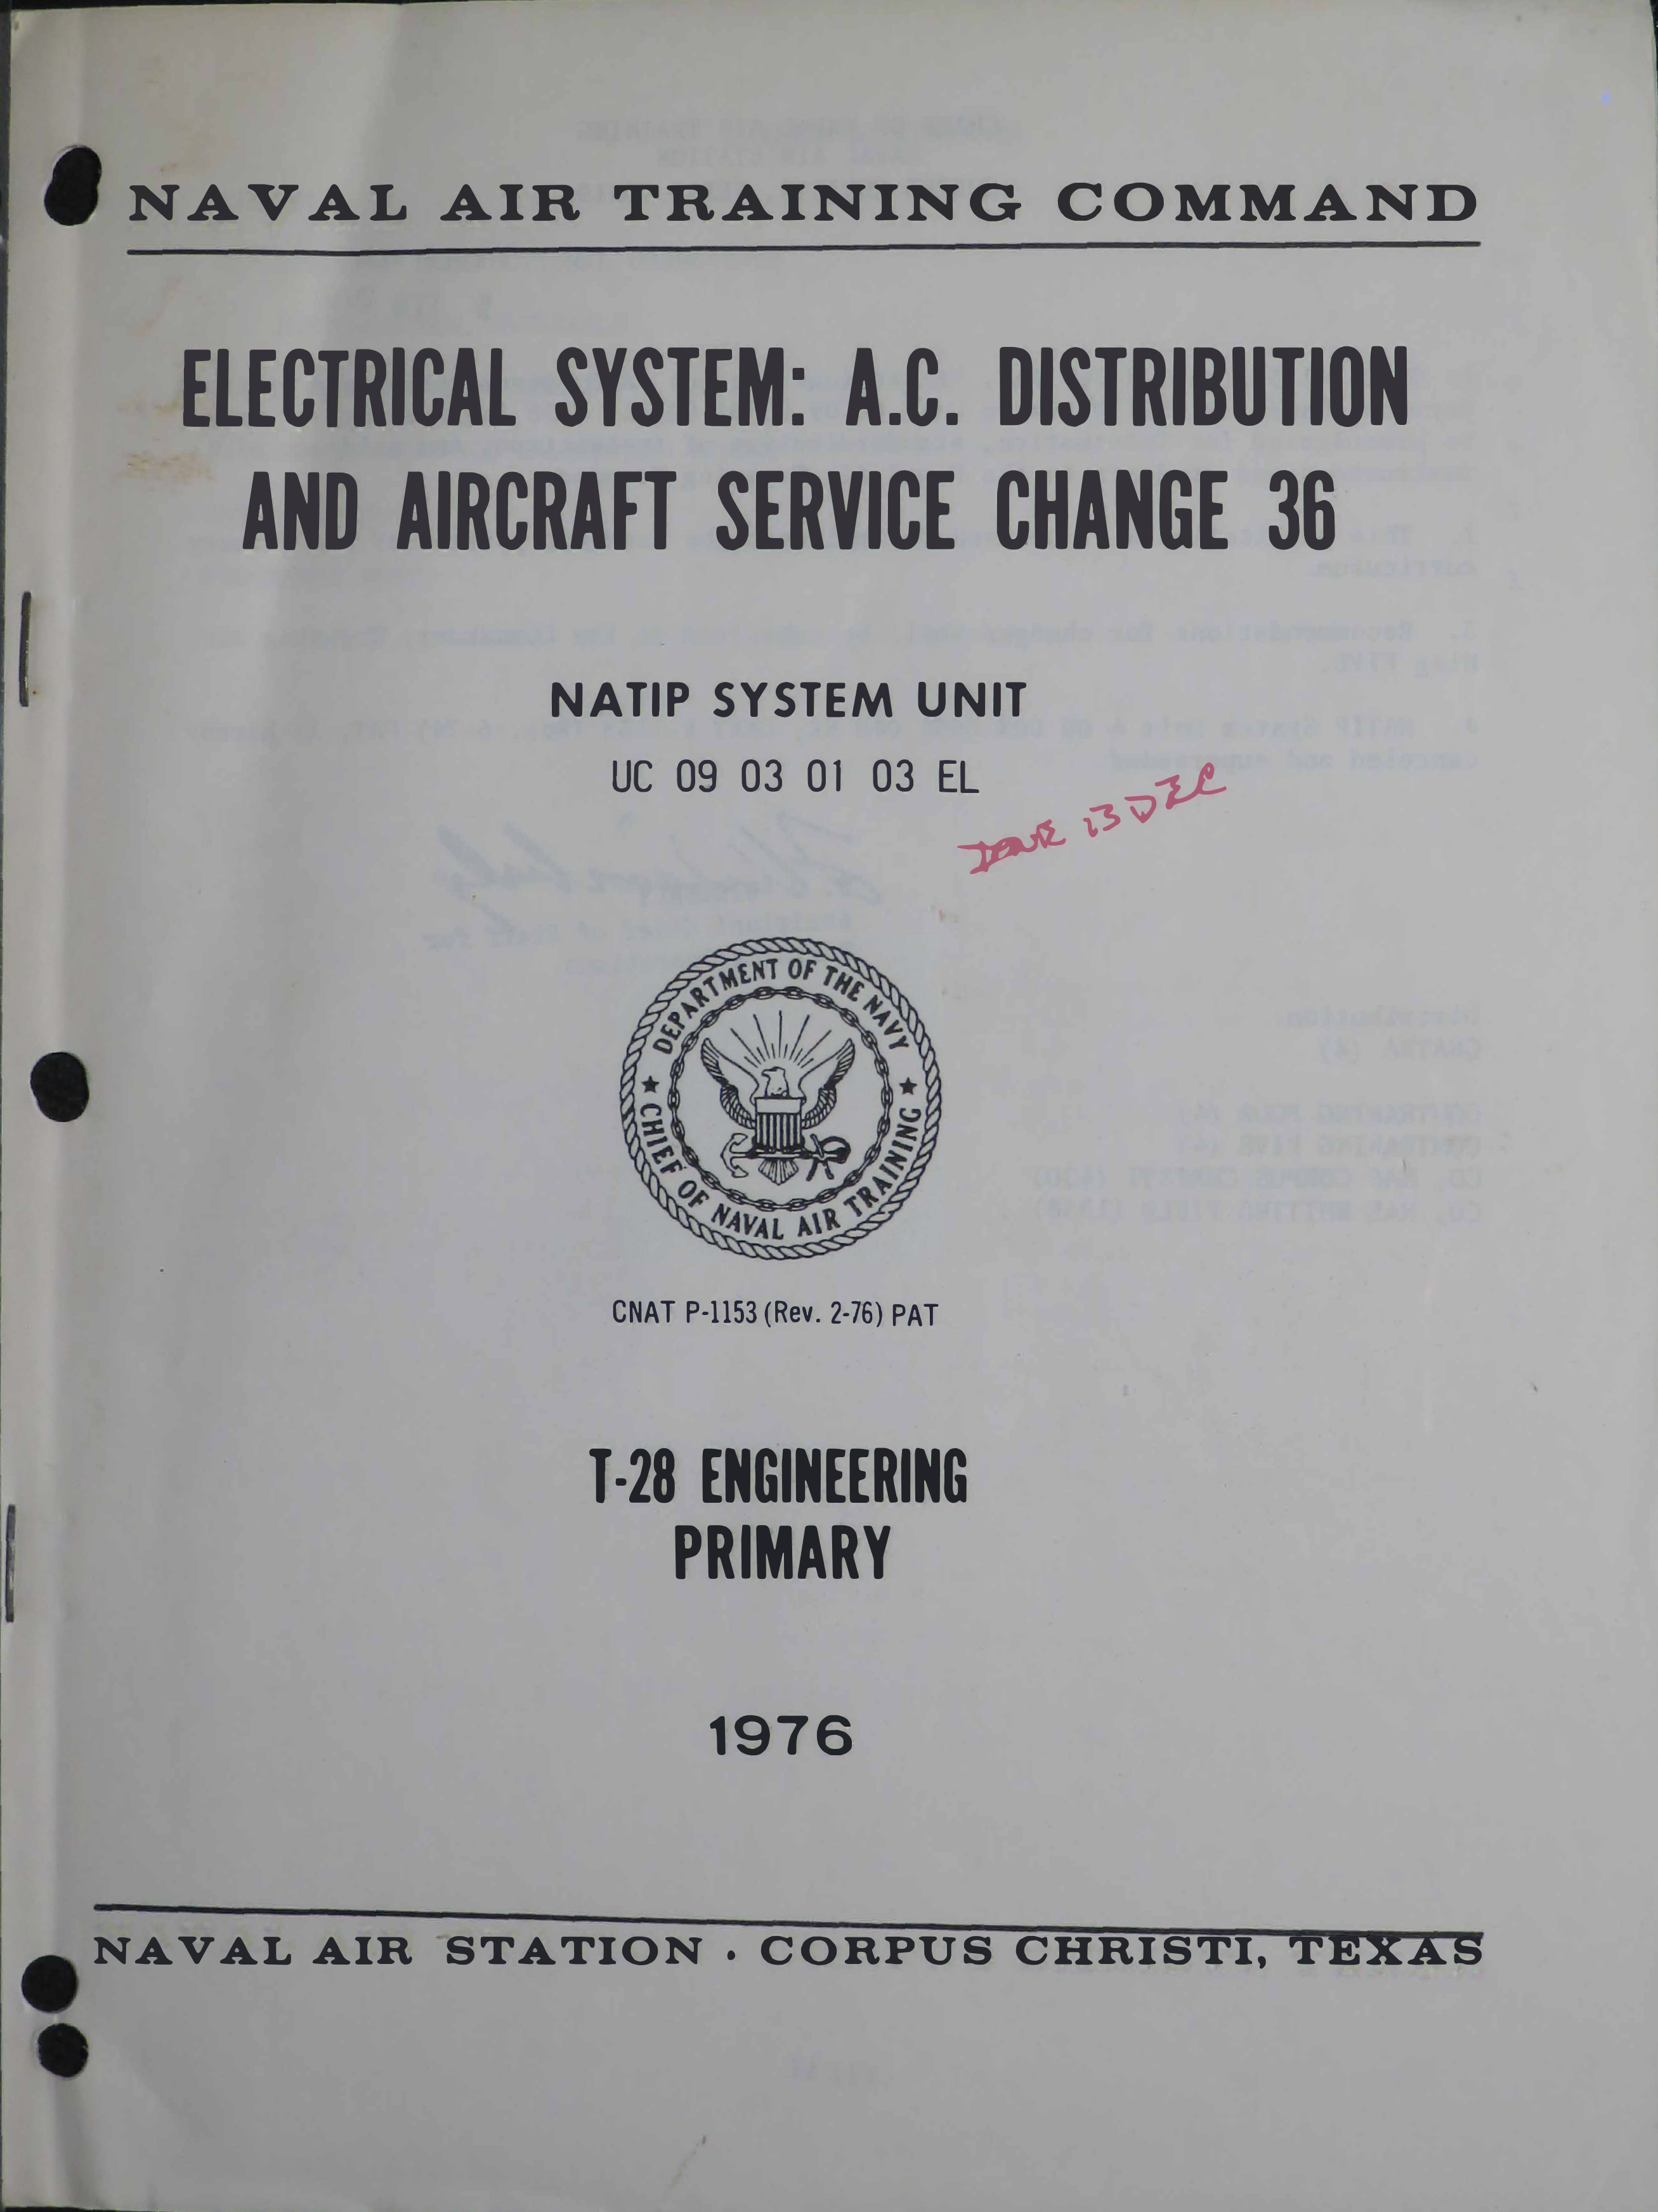 Sample page 1 from AirCorps Library document: Electrical System: A.C. Distribution and Aircraft Service Chance 36